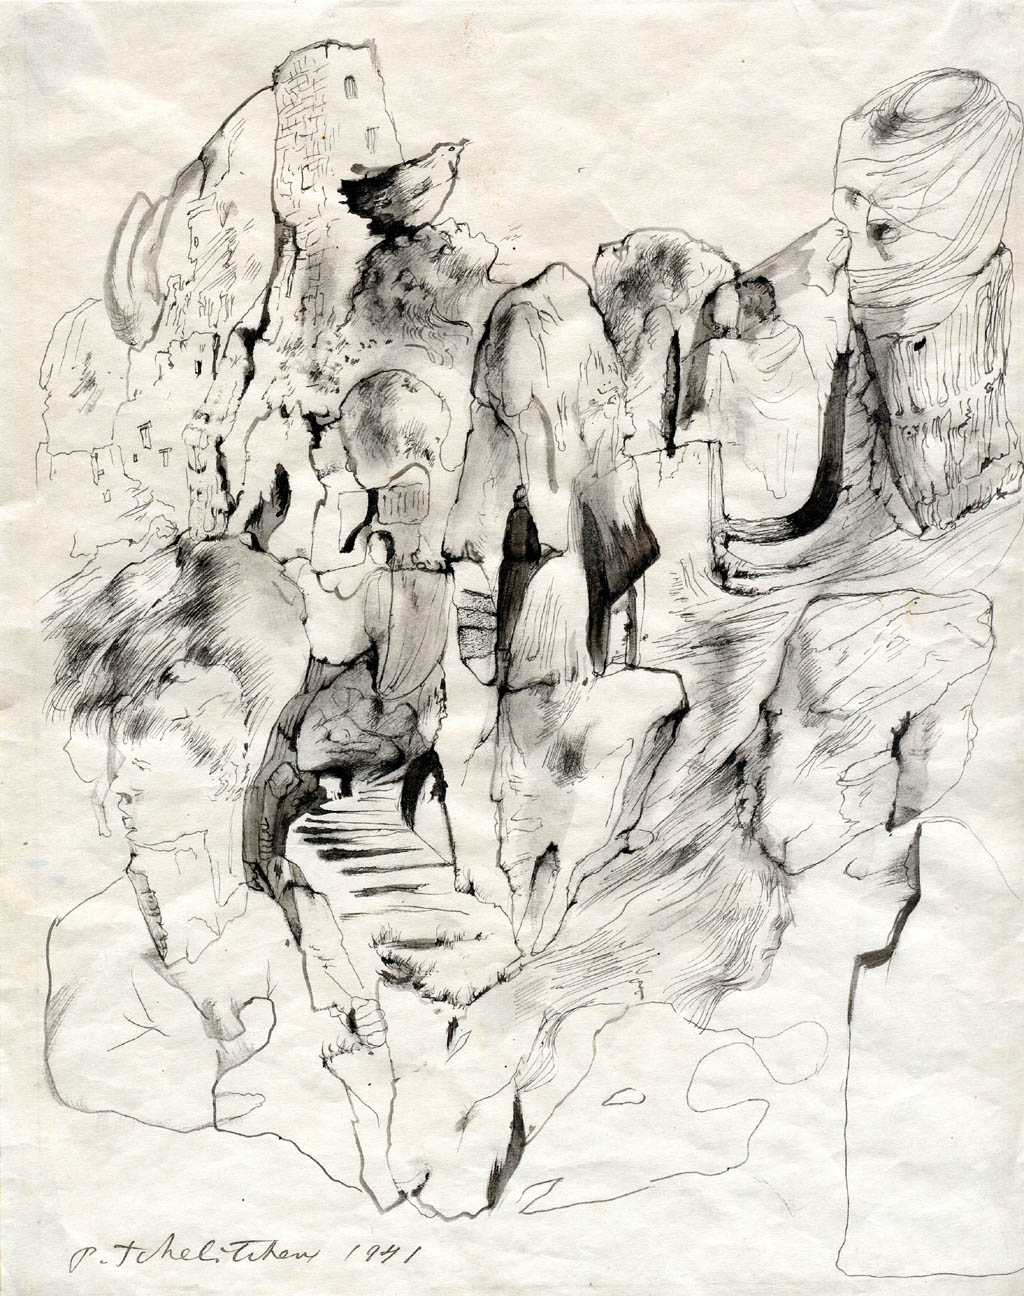 Pavel Tchelitchew - Metamorphic Landscape - 1941 ink and wash on paper